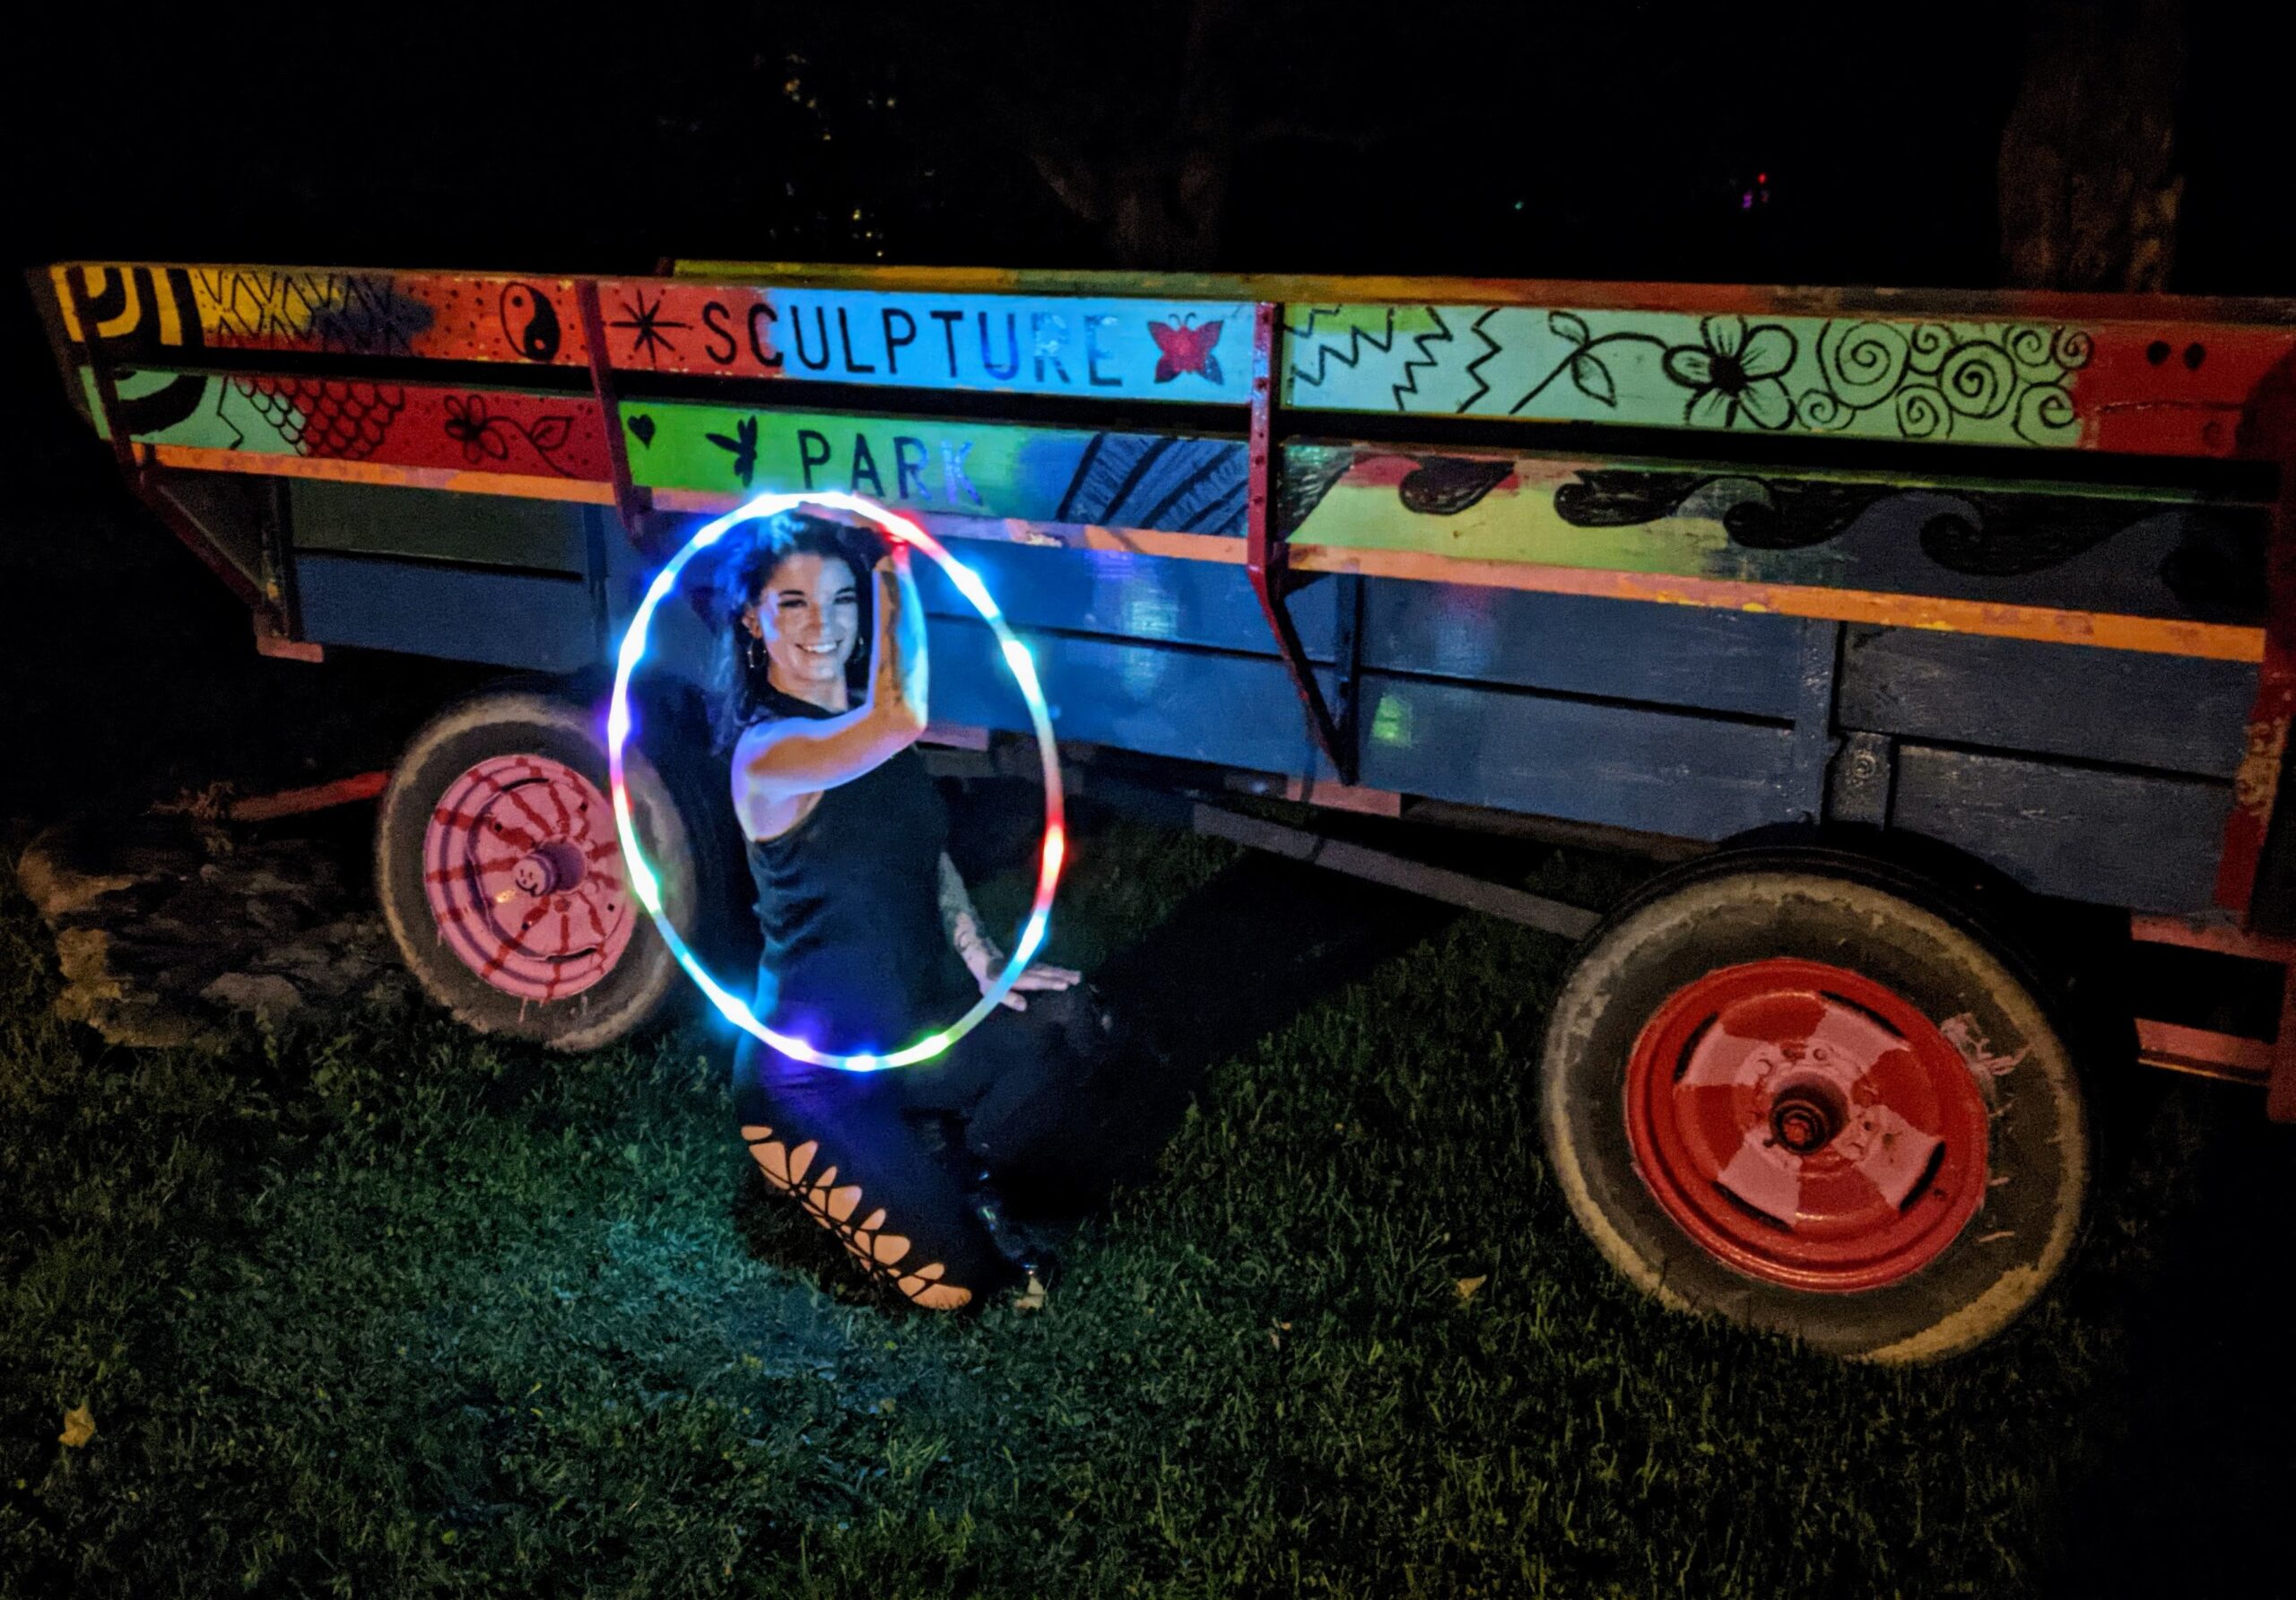 Video of first weekend of NIGHT LIGHTS at Griffis Sculpture Park